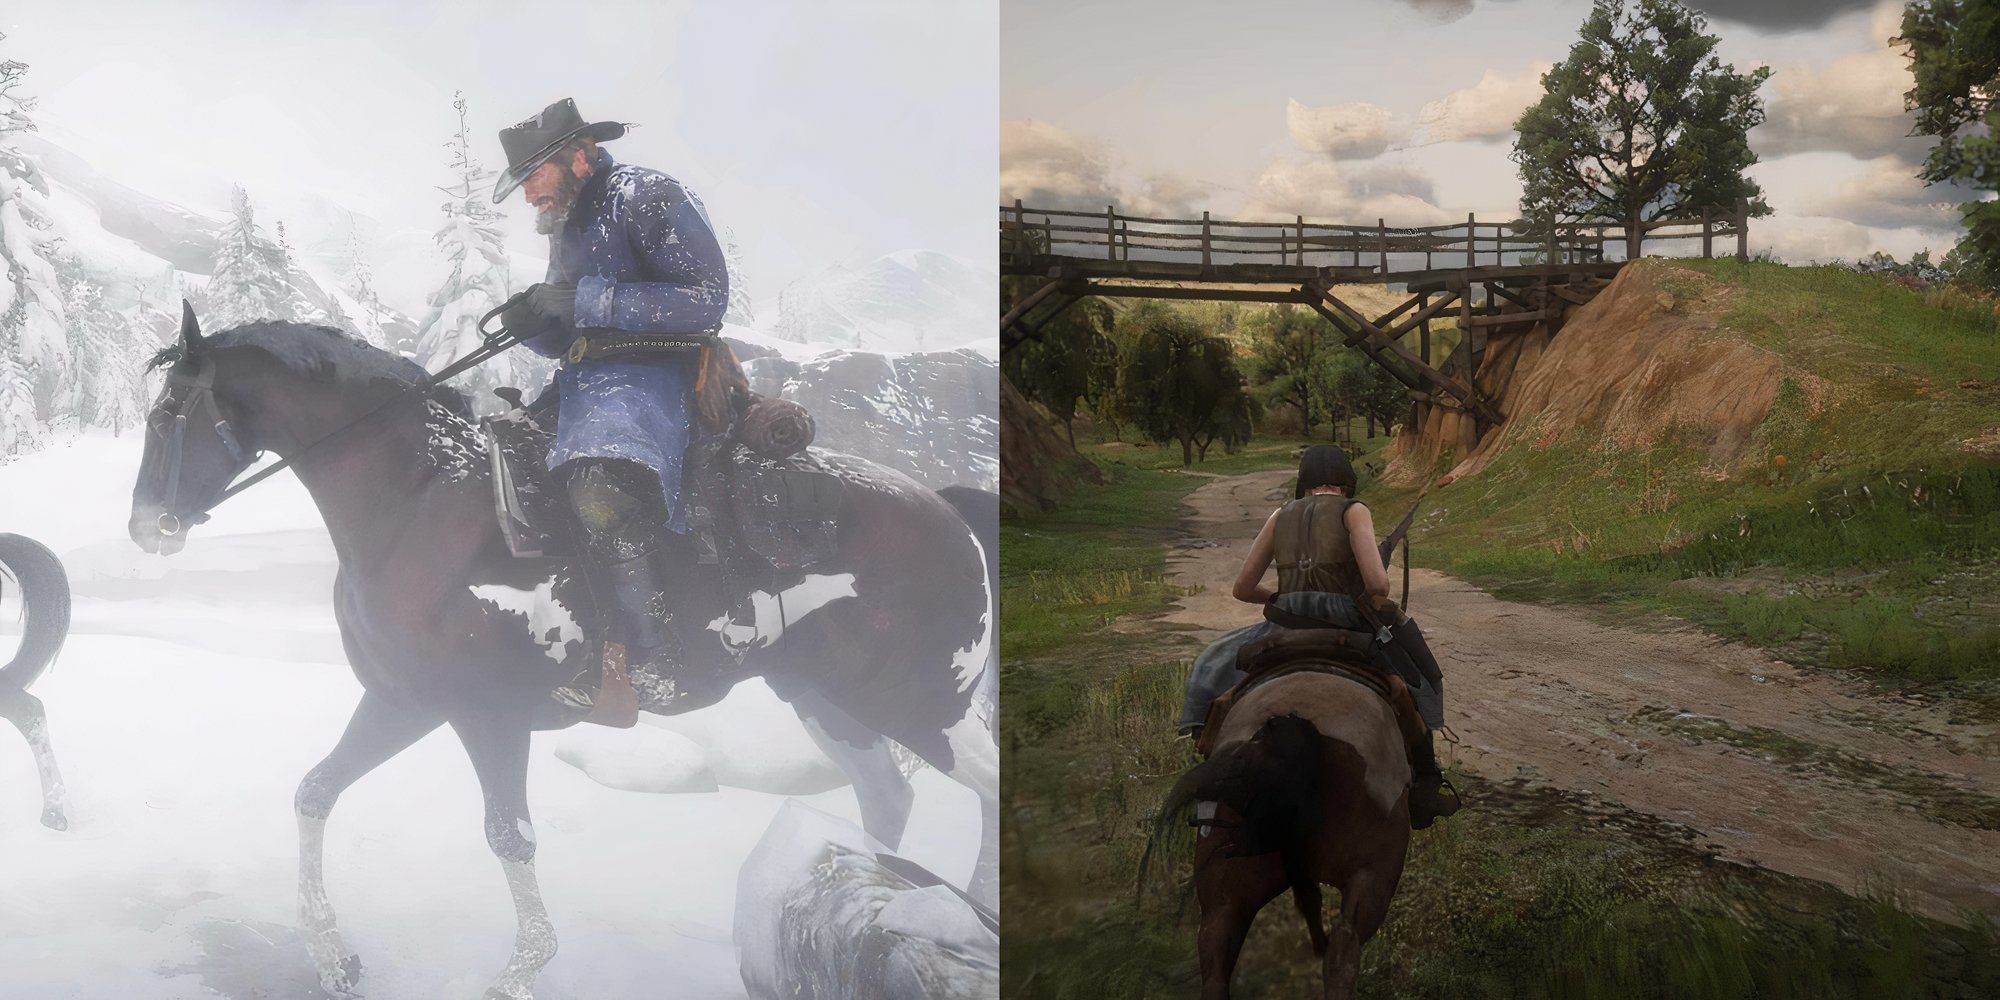 Arthur Morgan on a horse on the left, Online character on a horse on the right